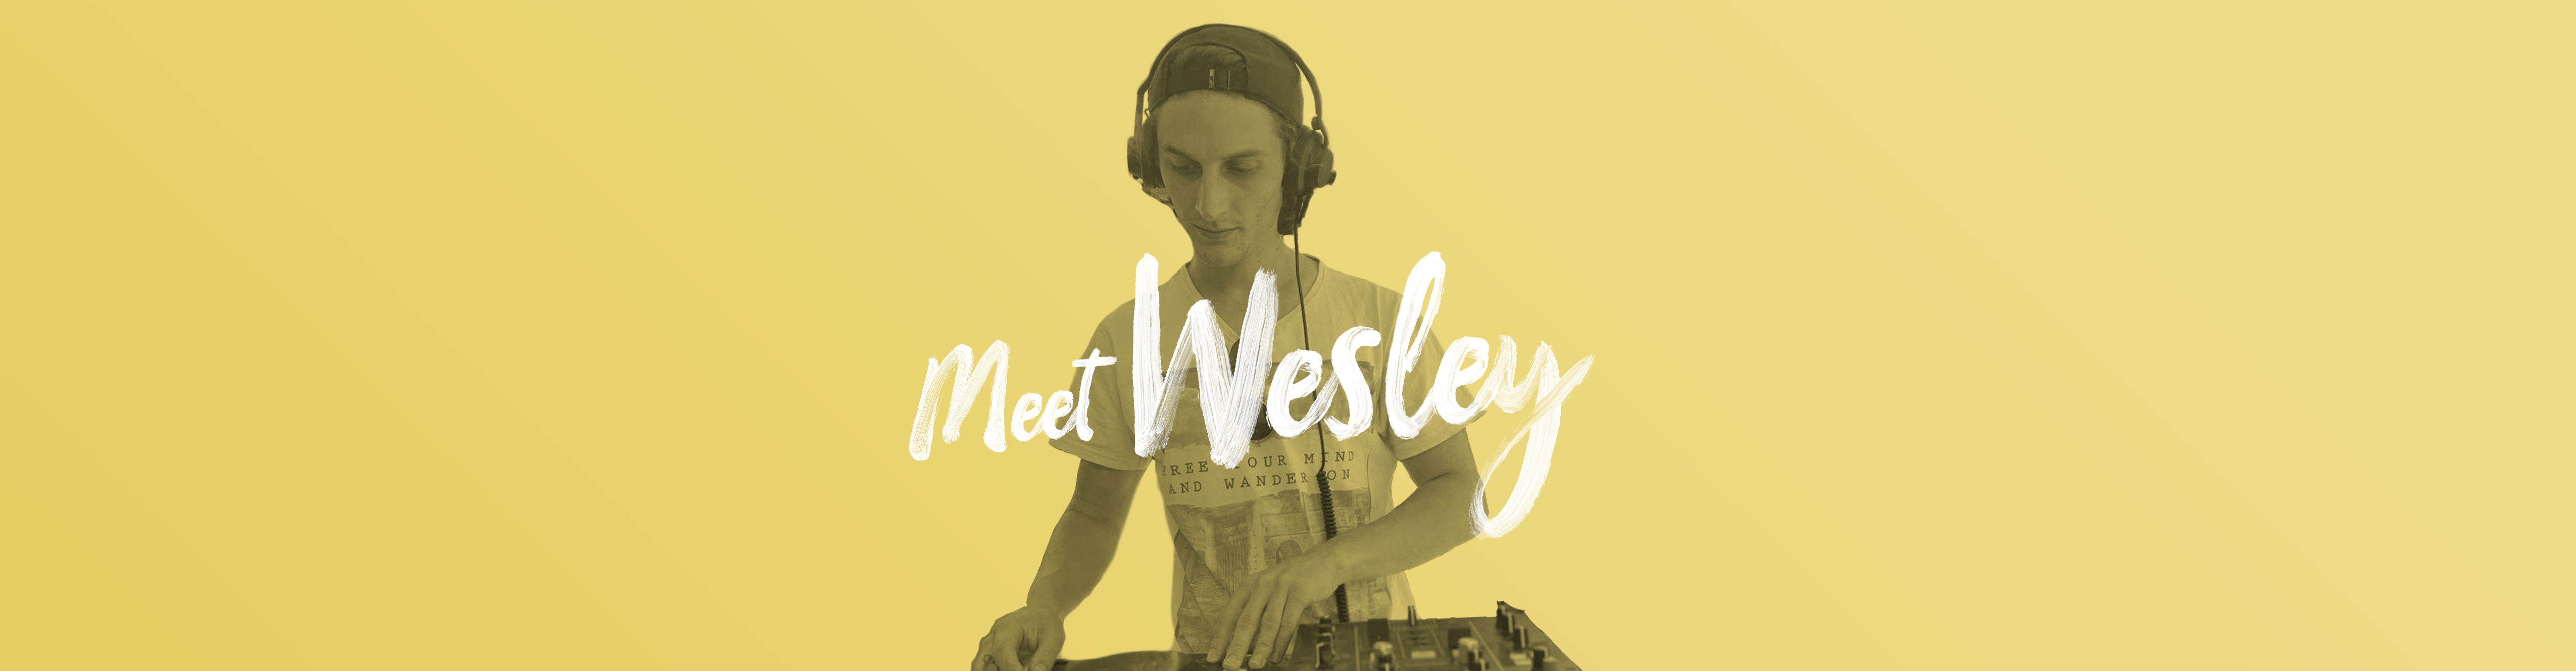 Wes-banner.png